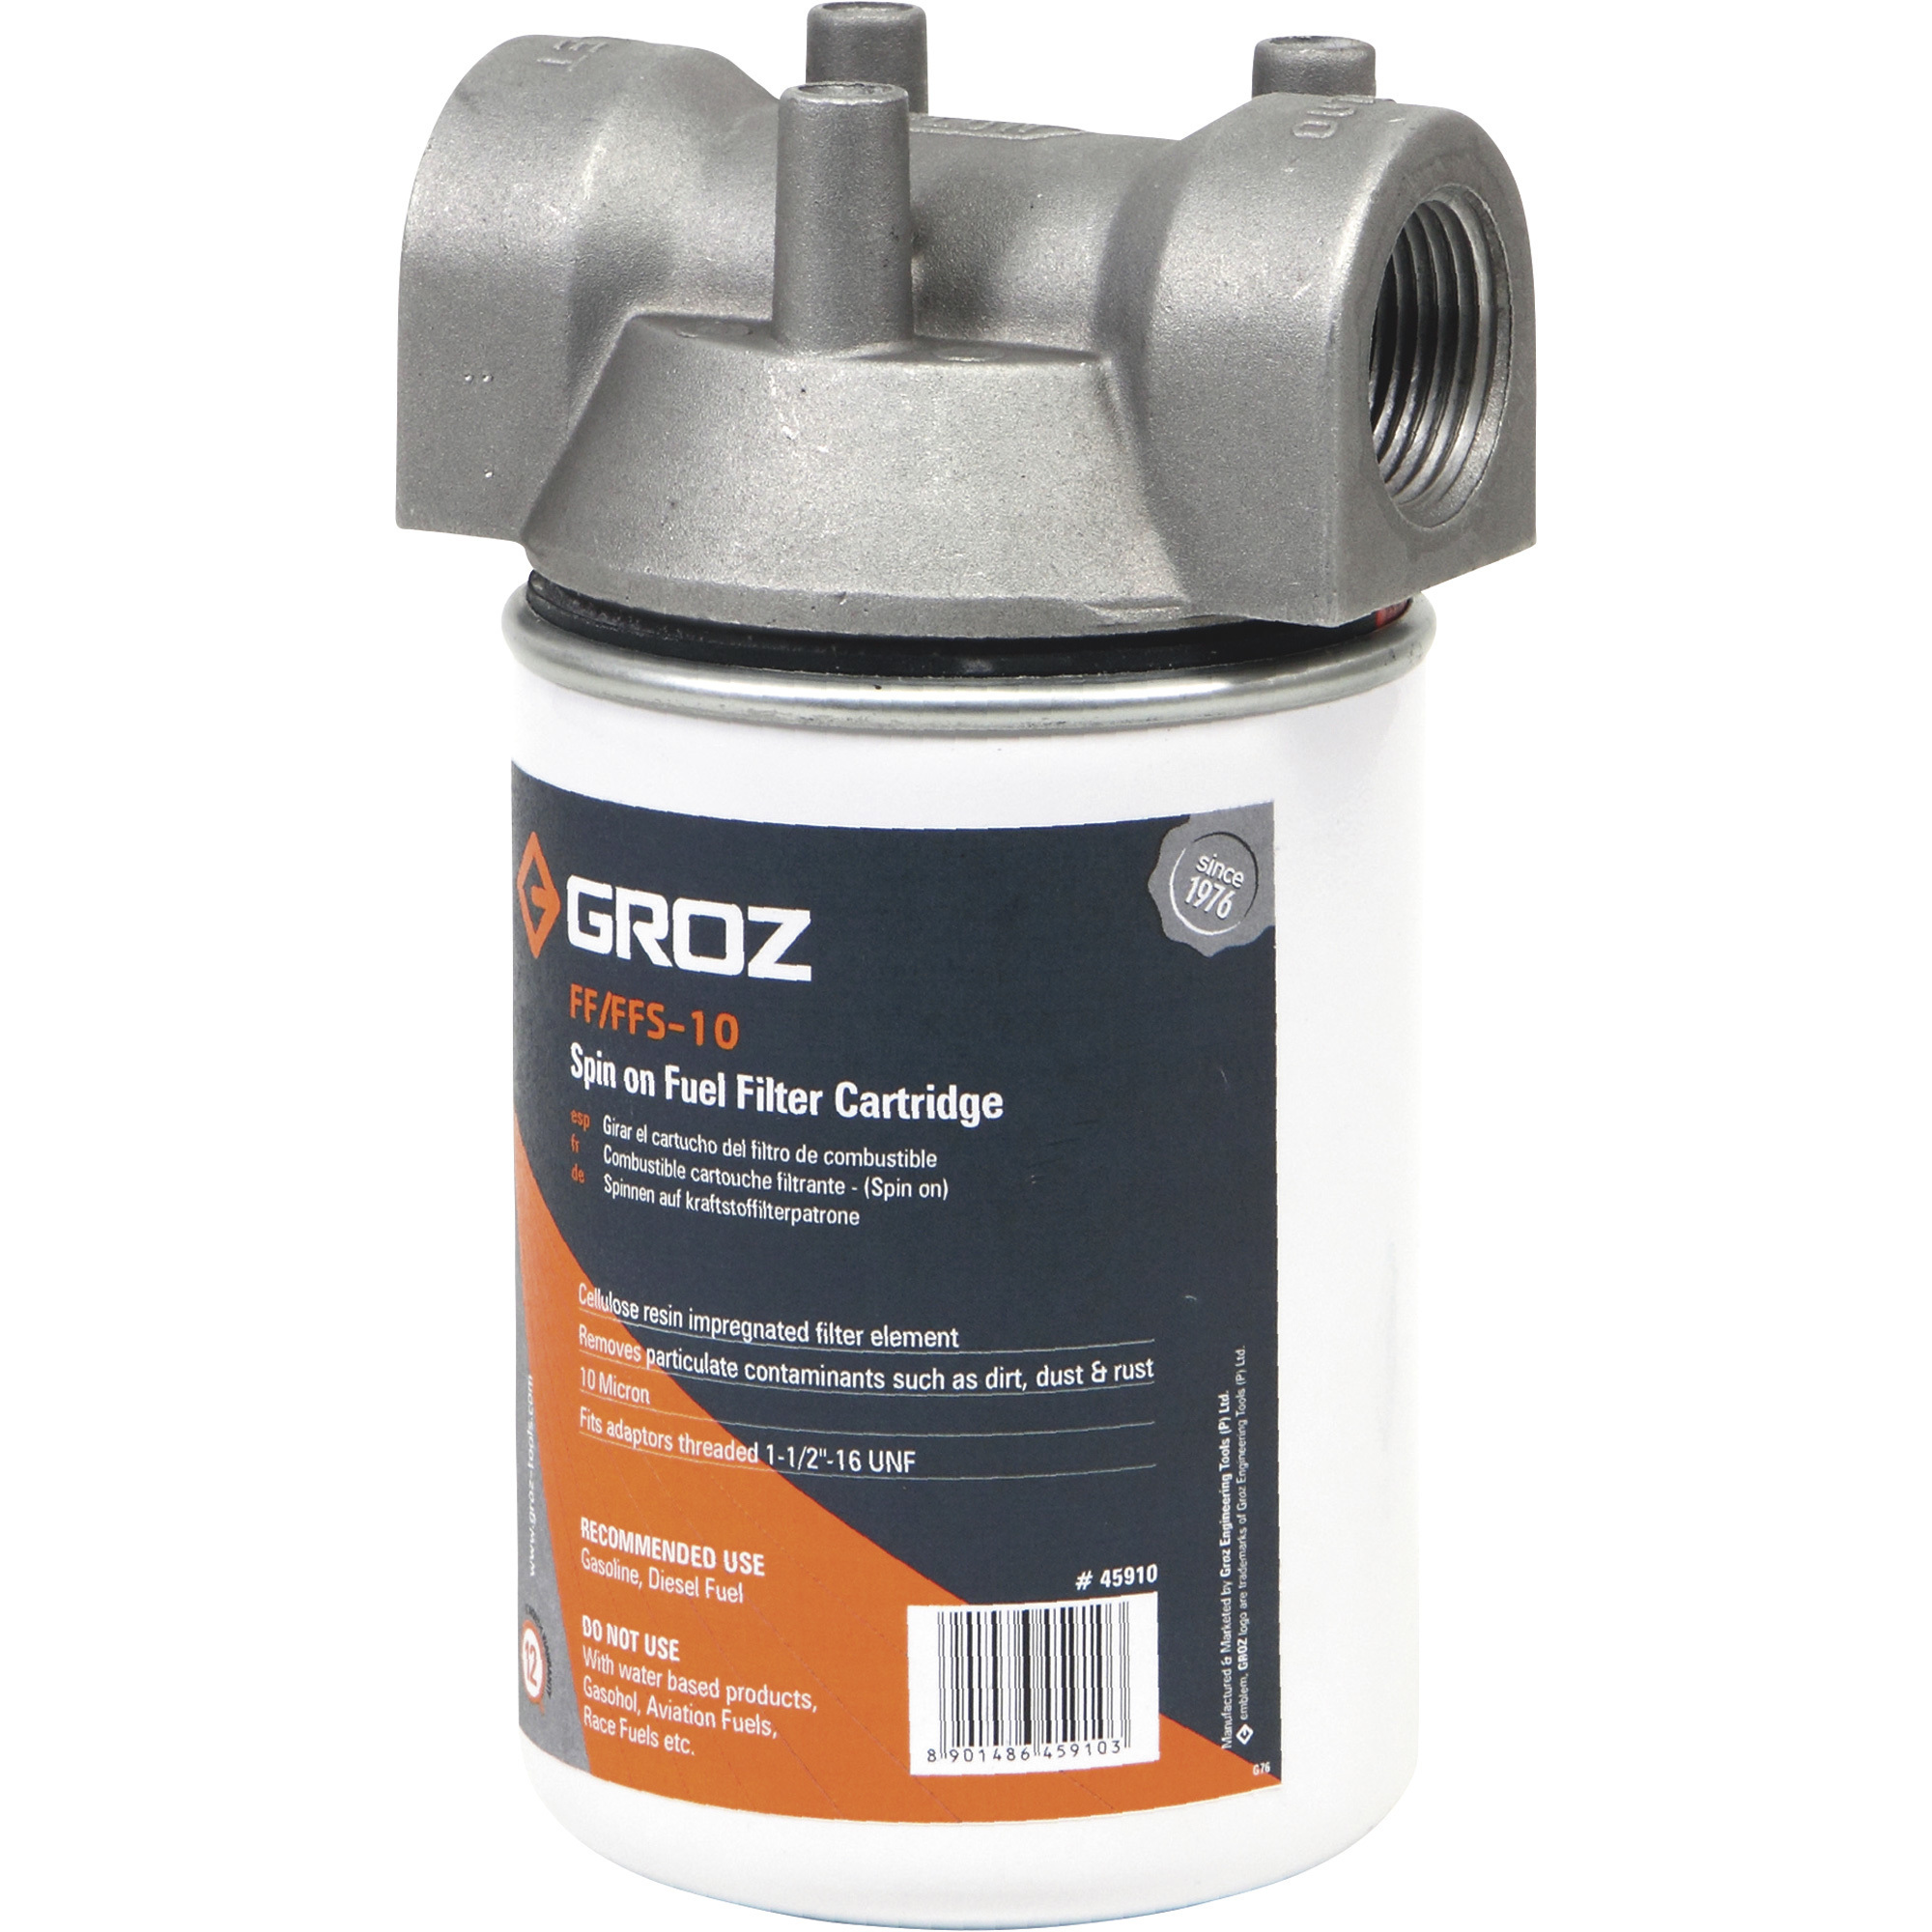 GROZ Fuel Filter with Spin On Cartridge, 10 Micron, 20 GPM, 1Inch NPT Thread, Model FFS/10/N